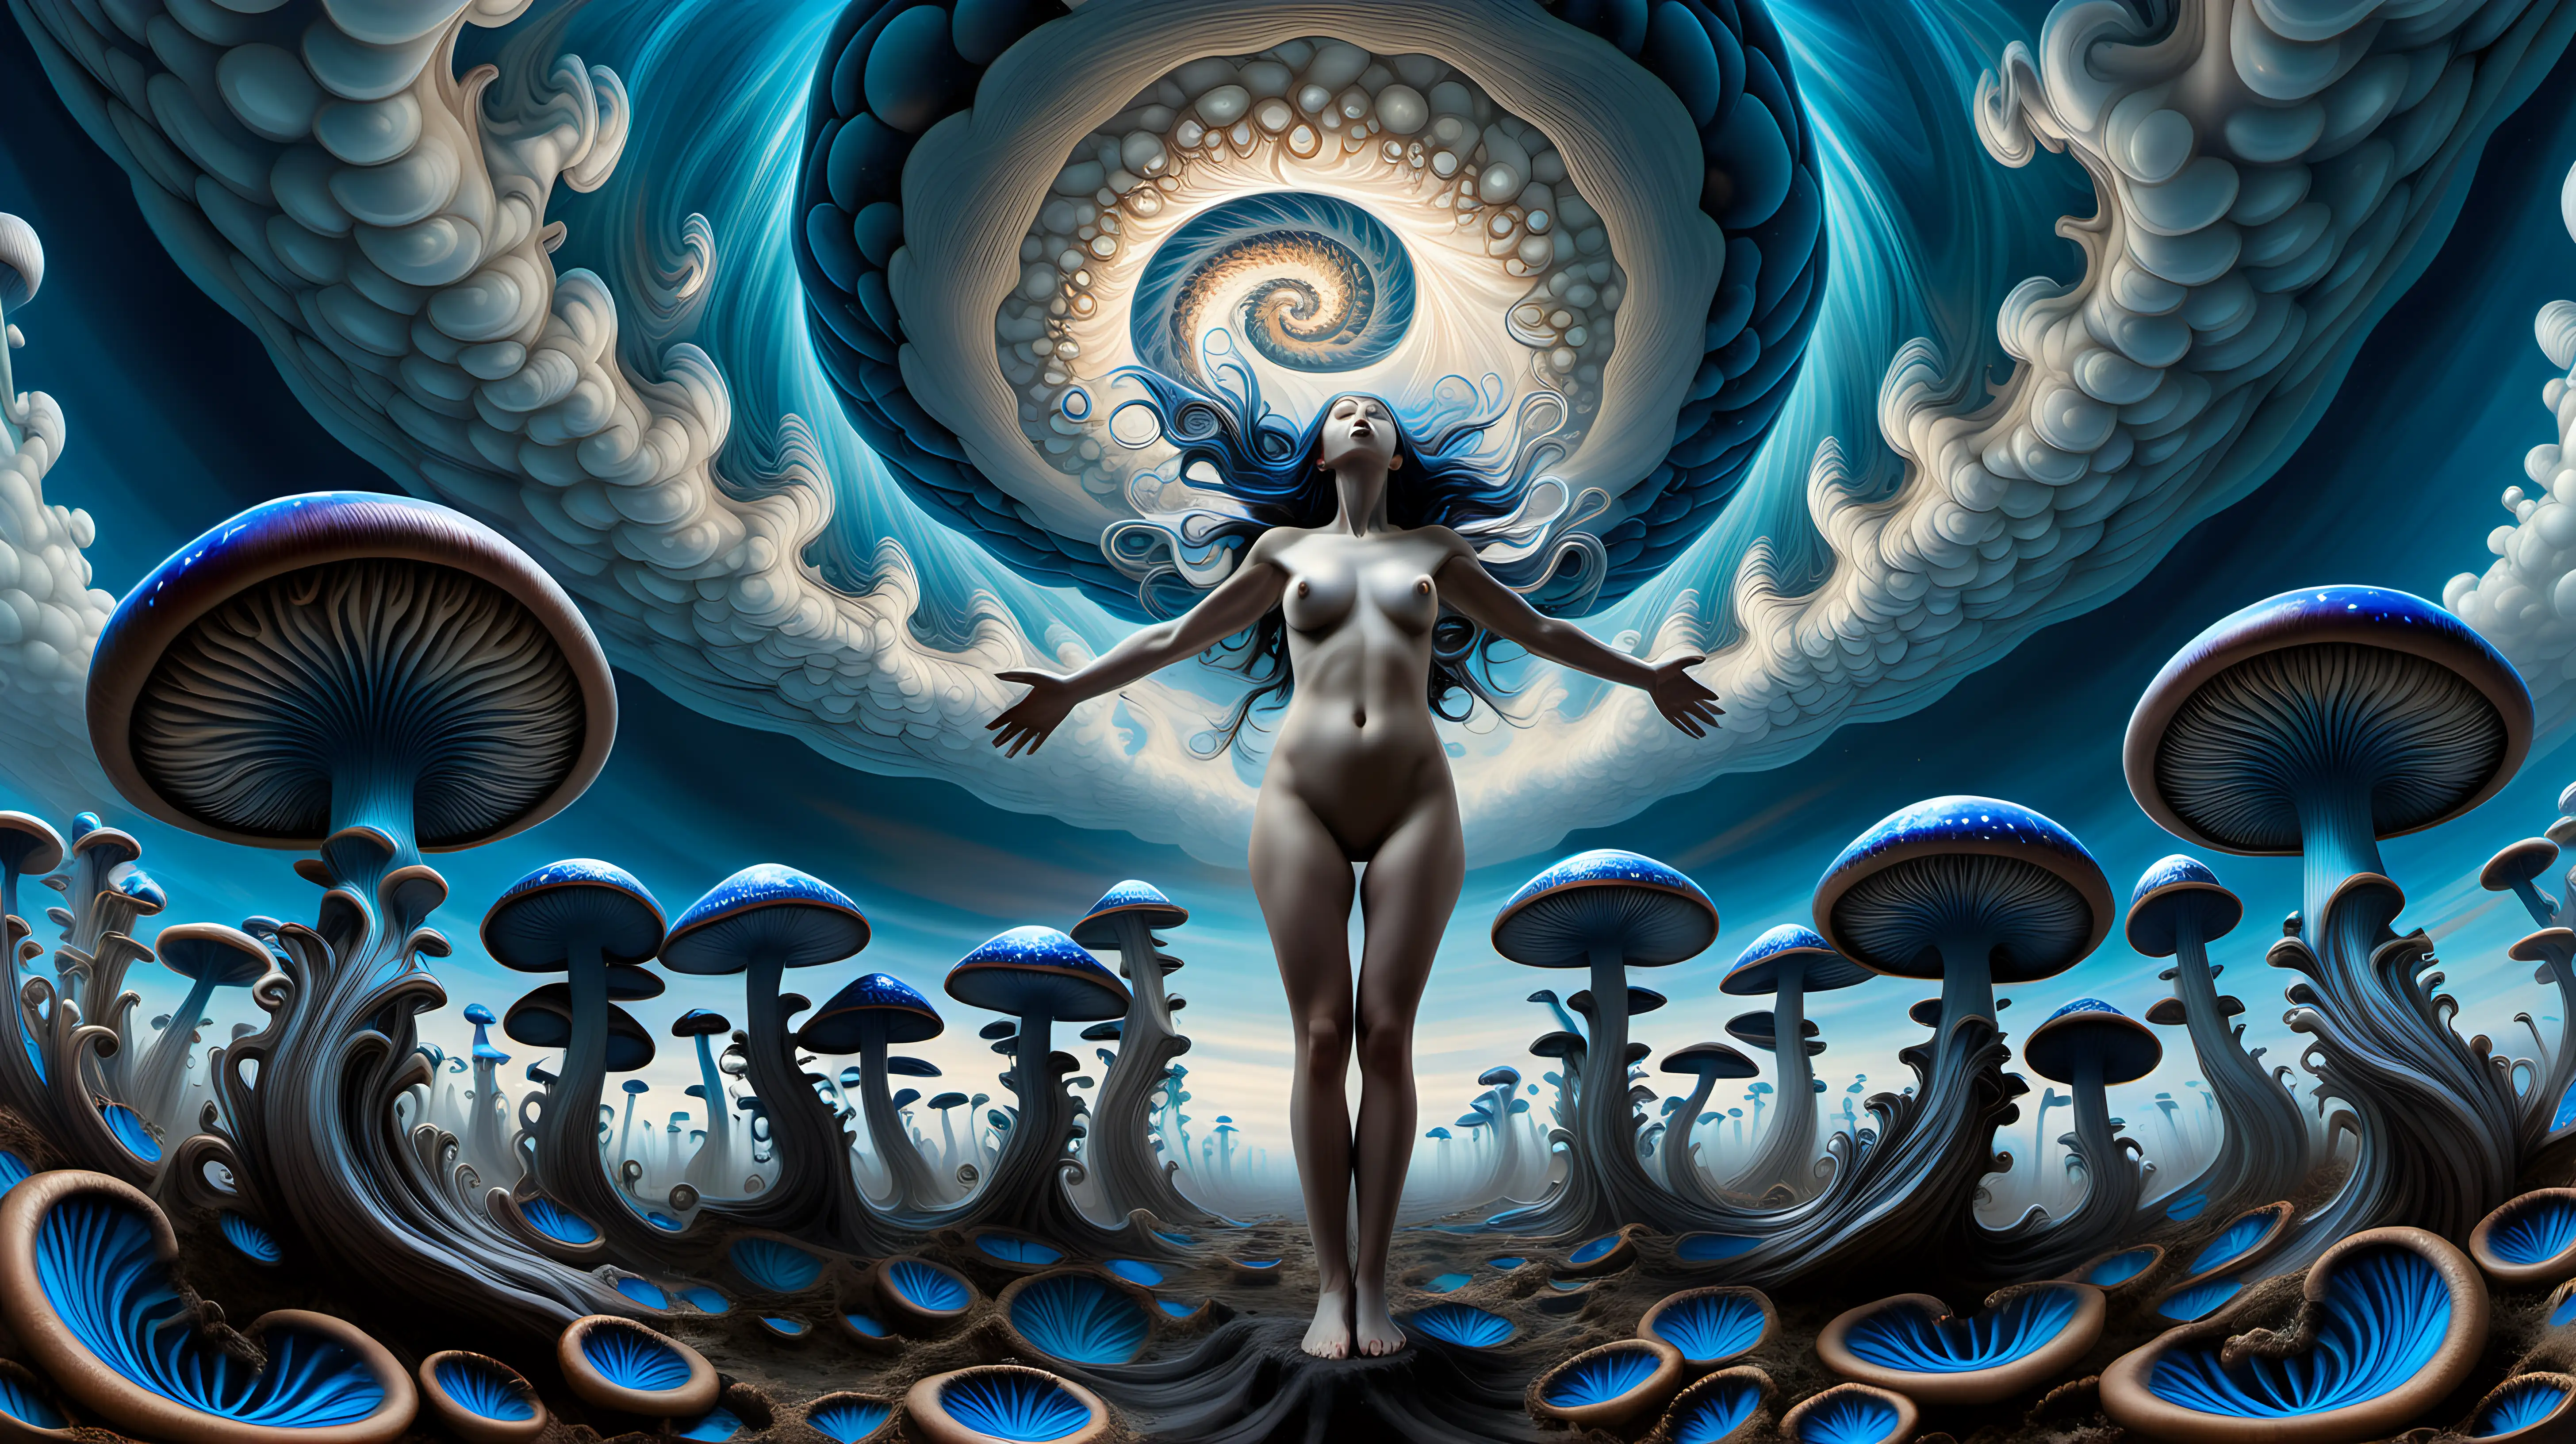 Psychedelic fractal sky with swirling fluid , blue mushrooms extending from the ground up to the sky on right and left, nude female figure standing in center facing the sky with arms extended, hyper realistic, moody and euphoric